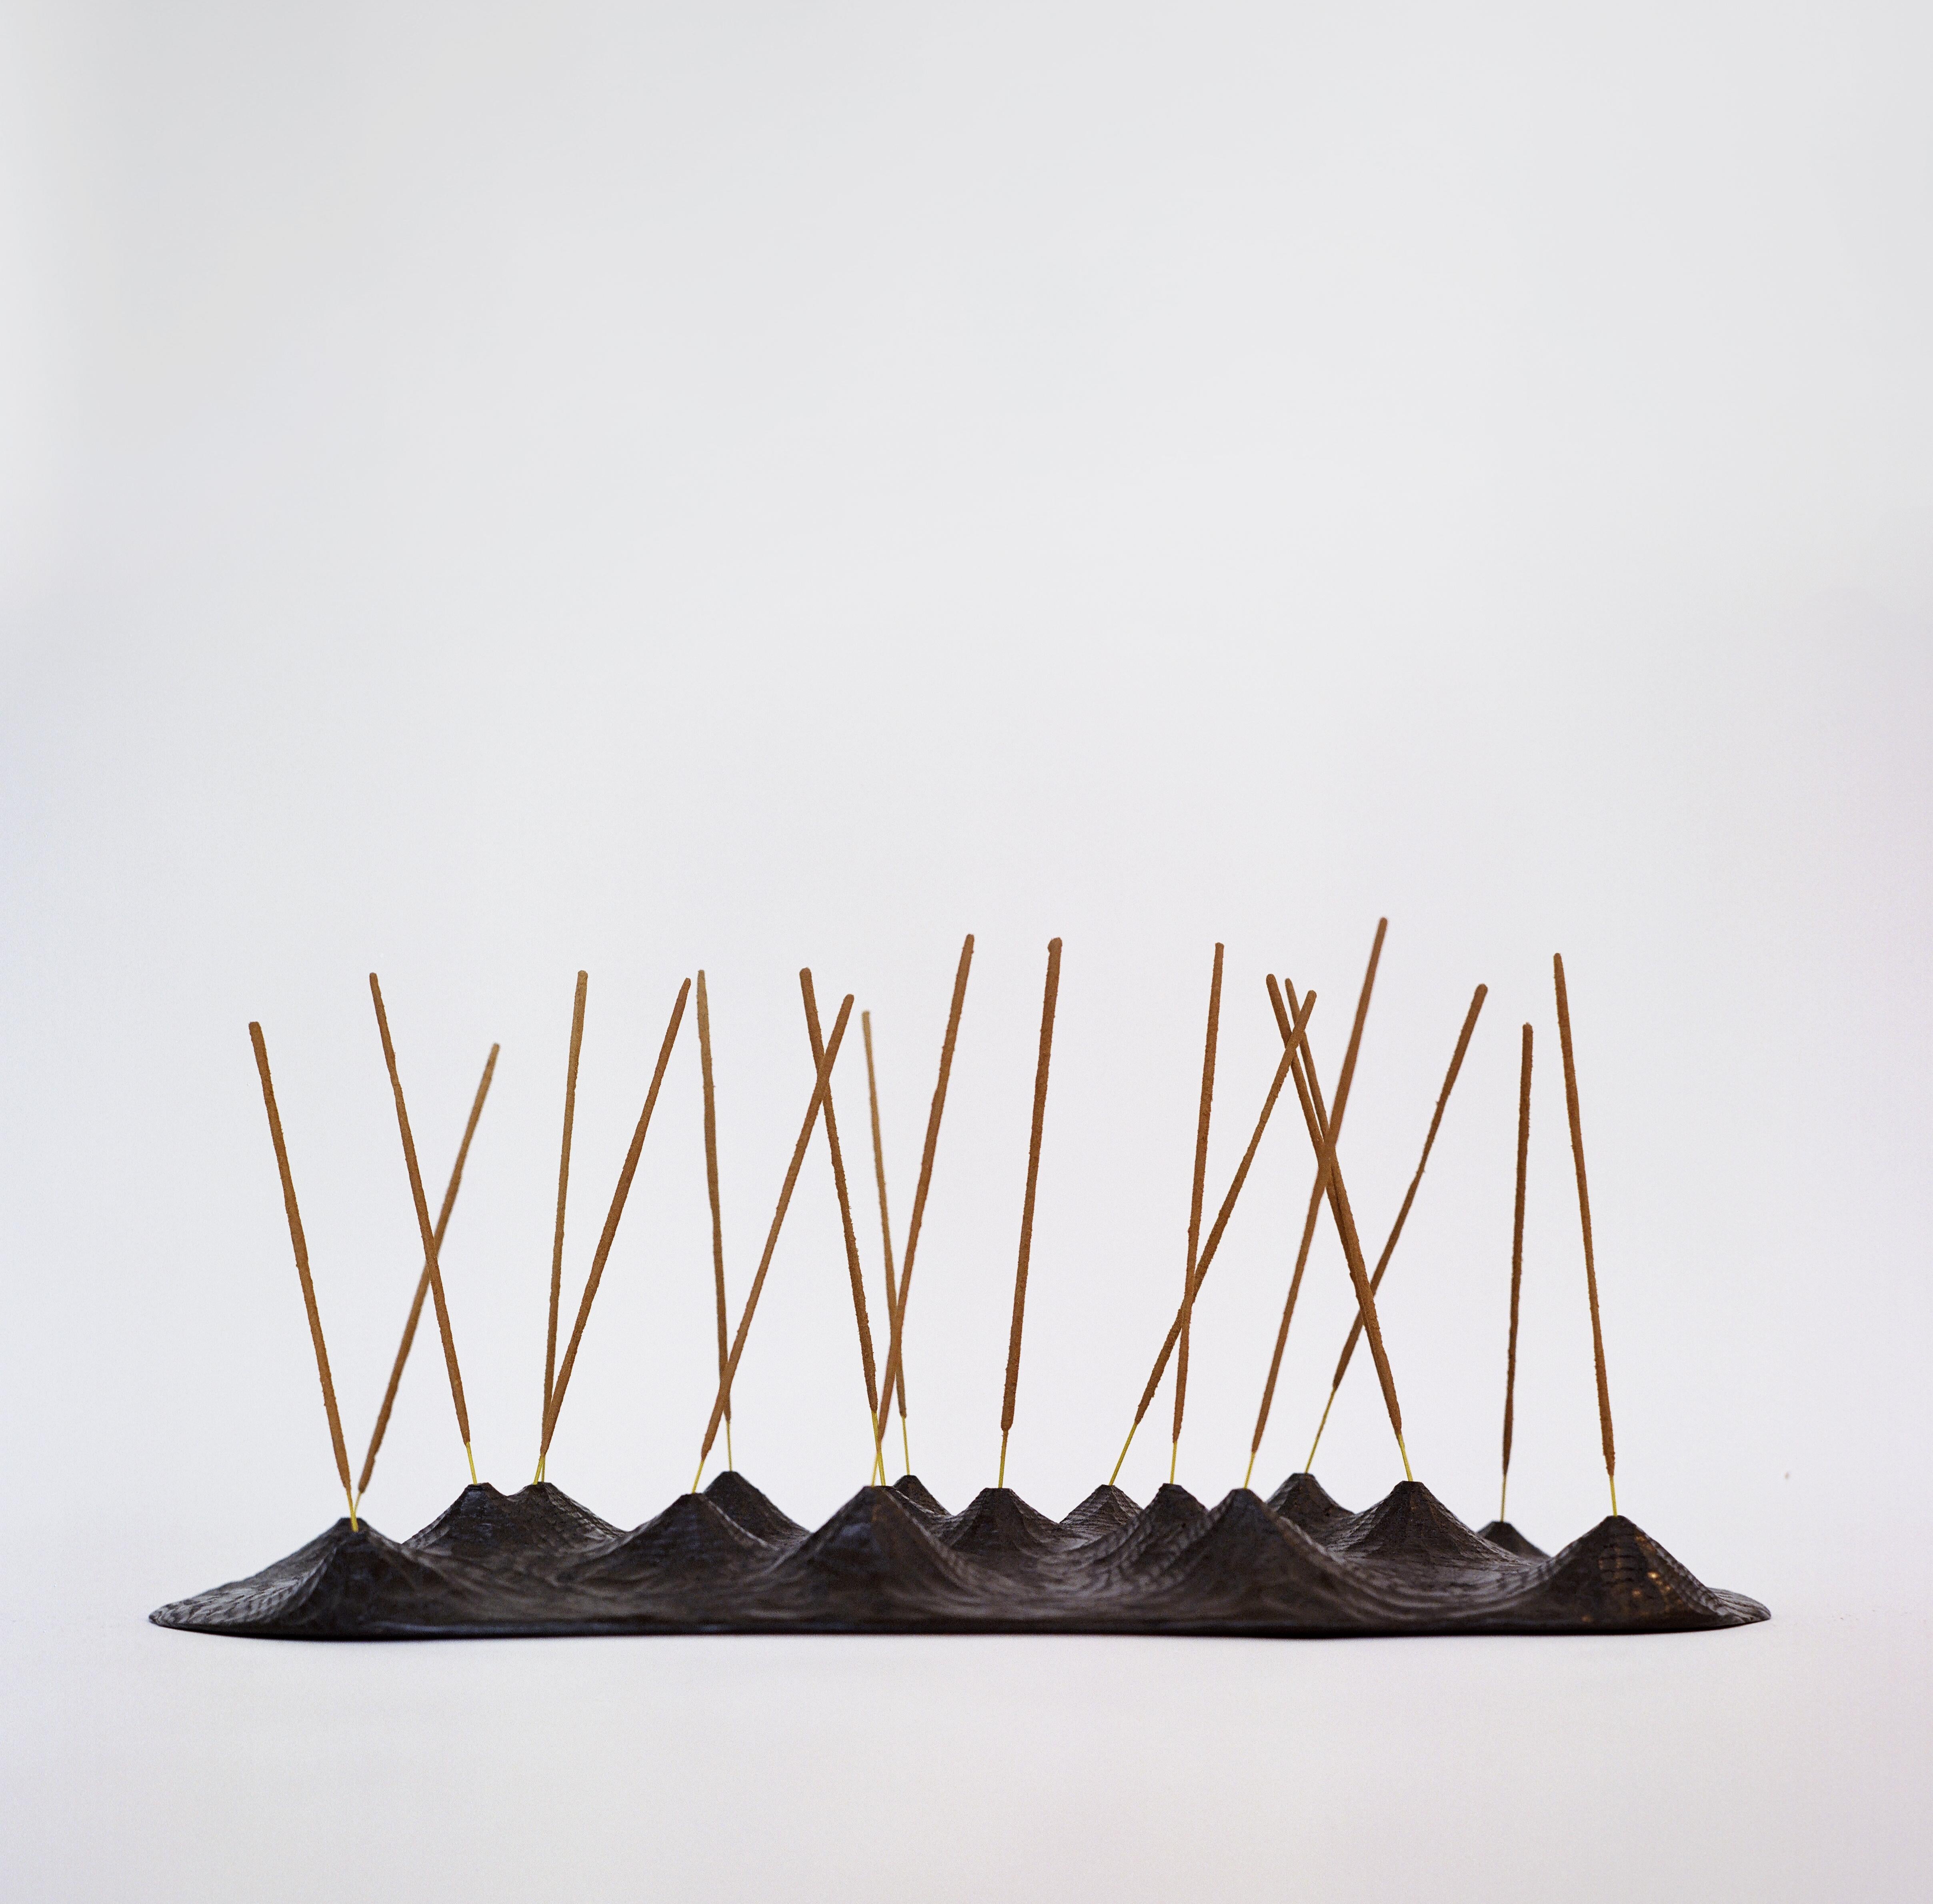 Incense object by Henry D'ath
Dimensions:D55 x W20 x H6 cm
Materials:Wood, Calligraphy Ink

Piece is handmade by artist.

Henry d’ath is a new zealand born, hong kong based artist and architect. 
Using predominantly salvaged material, the